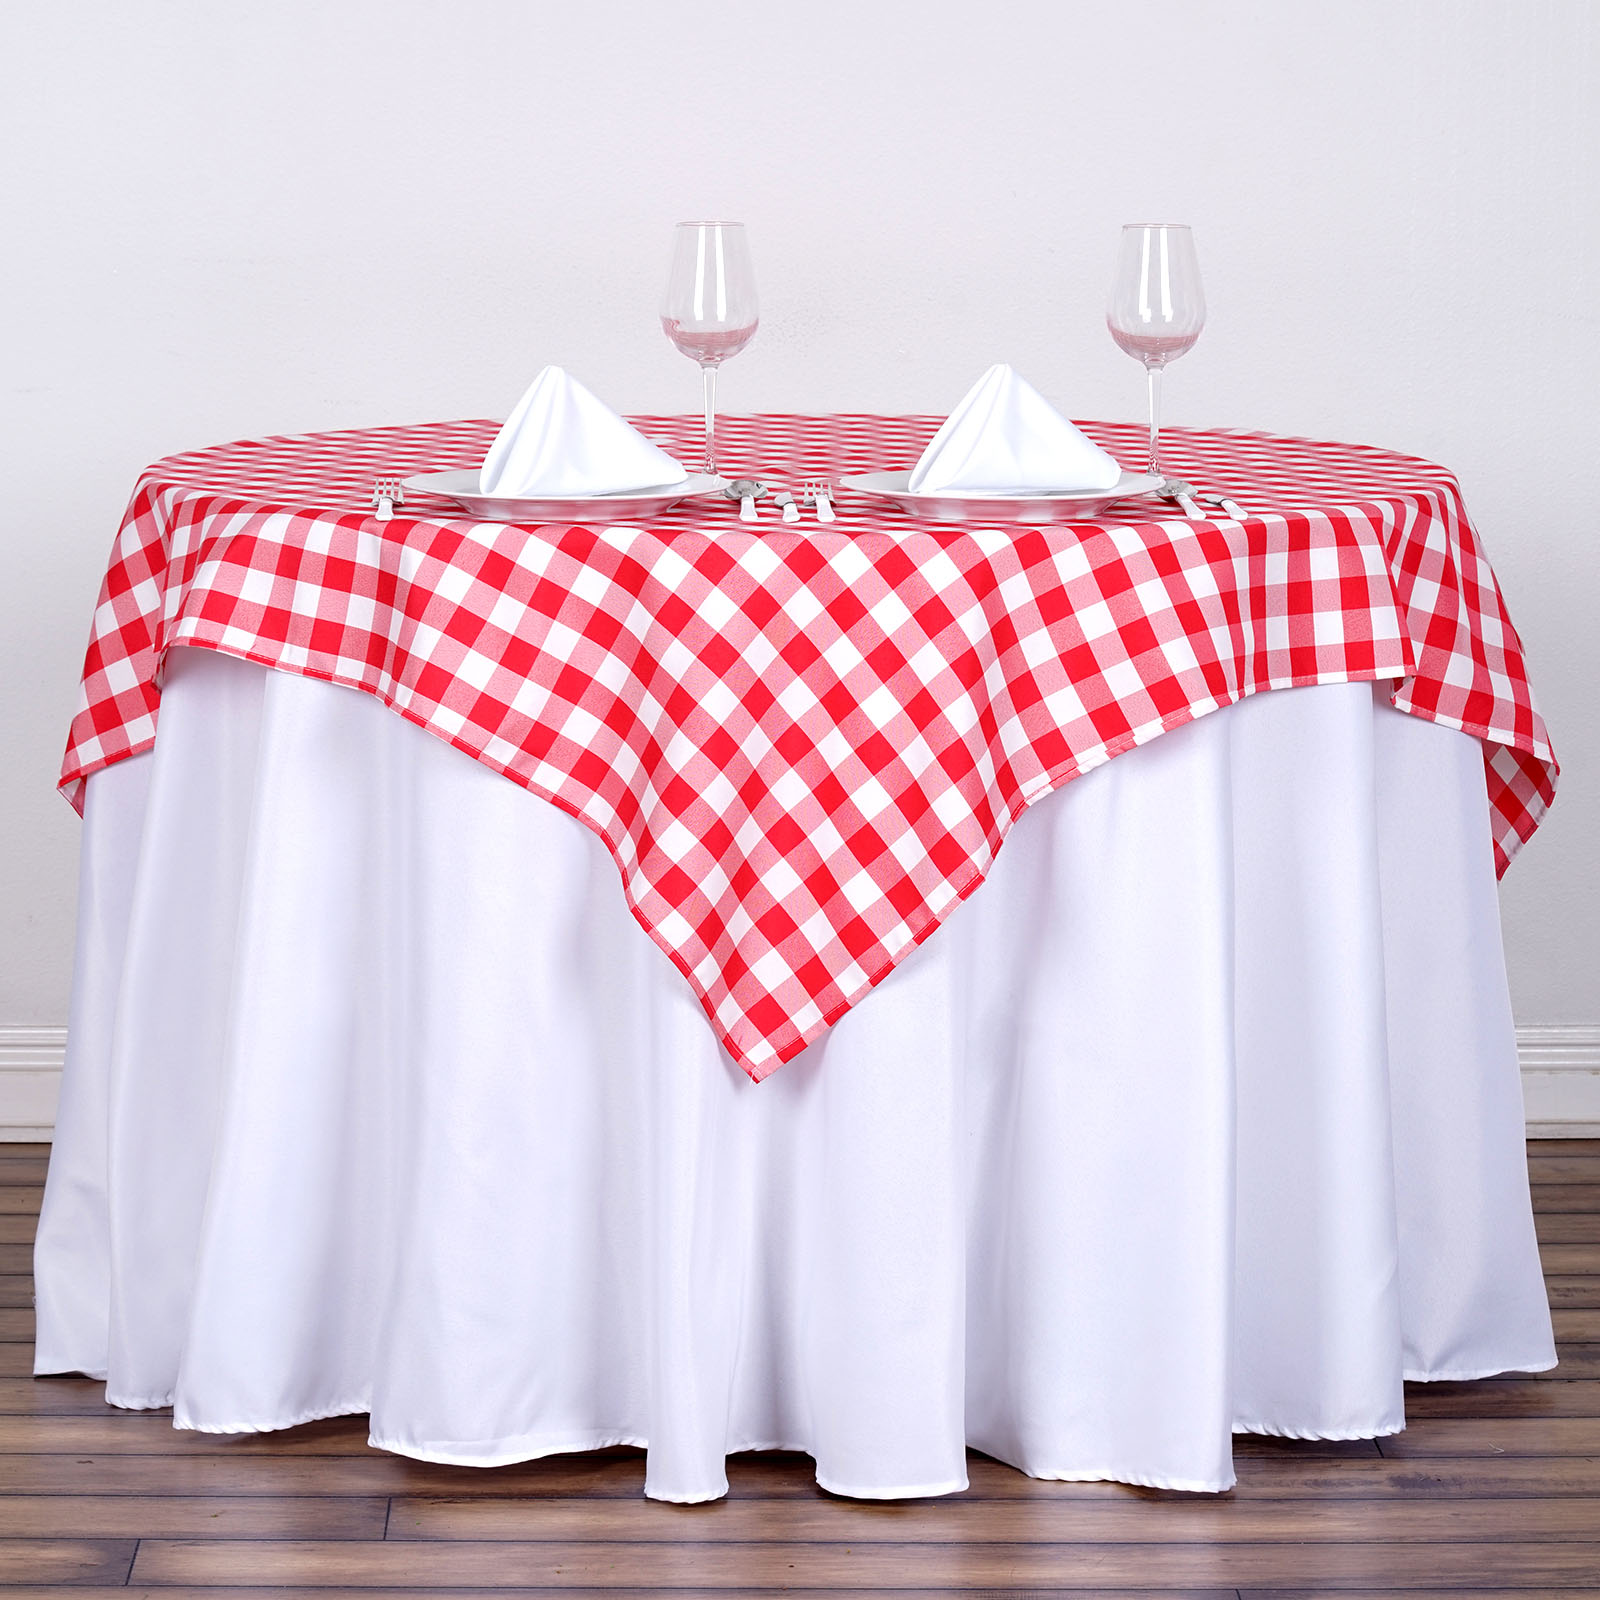 BalsaCircle 54" x 54" Square Gingham Checkered Polyester Tablecloth Red and White - image 1 of 9